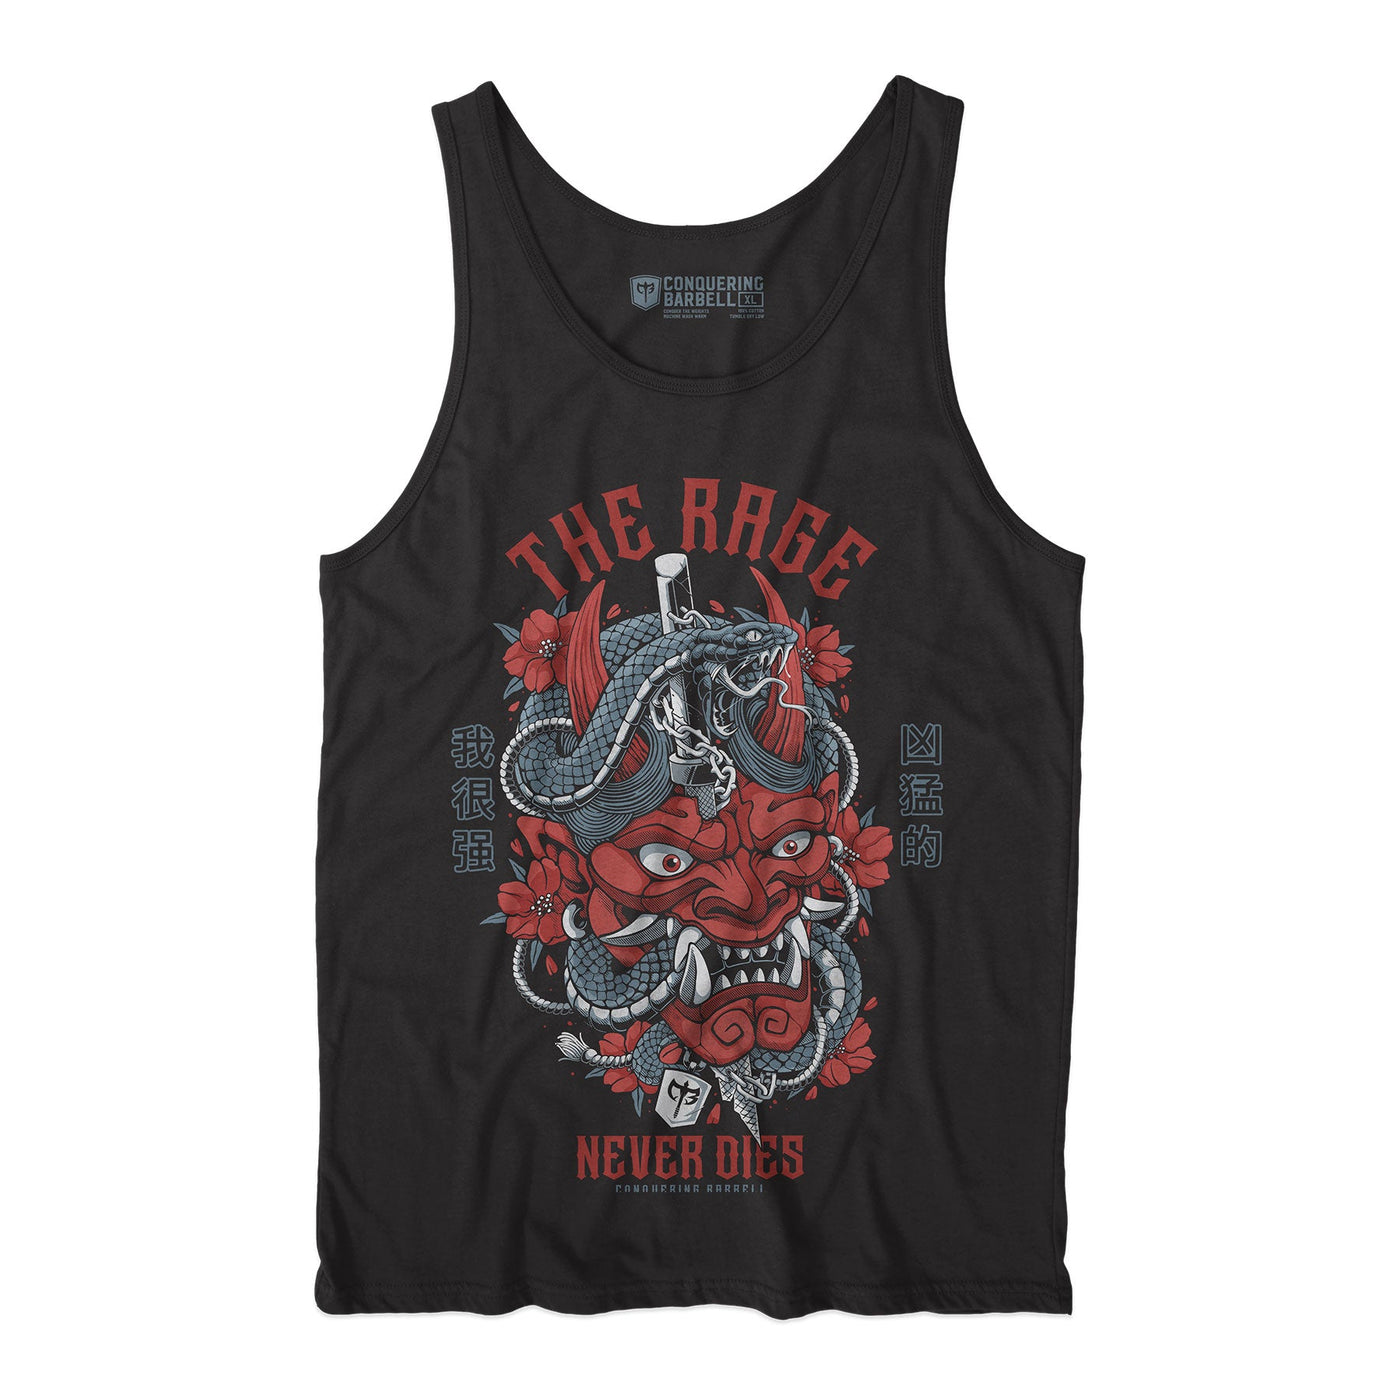 The Rage Never Dies - Hannya Mask - on Black tank top - Conquering Barbell